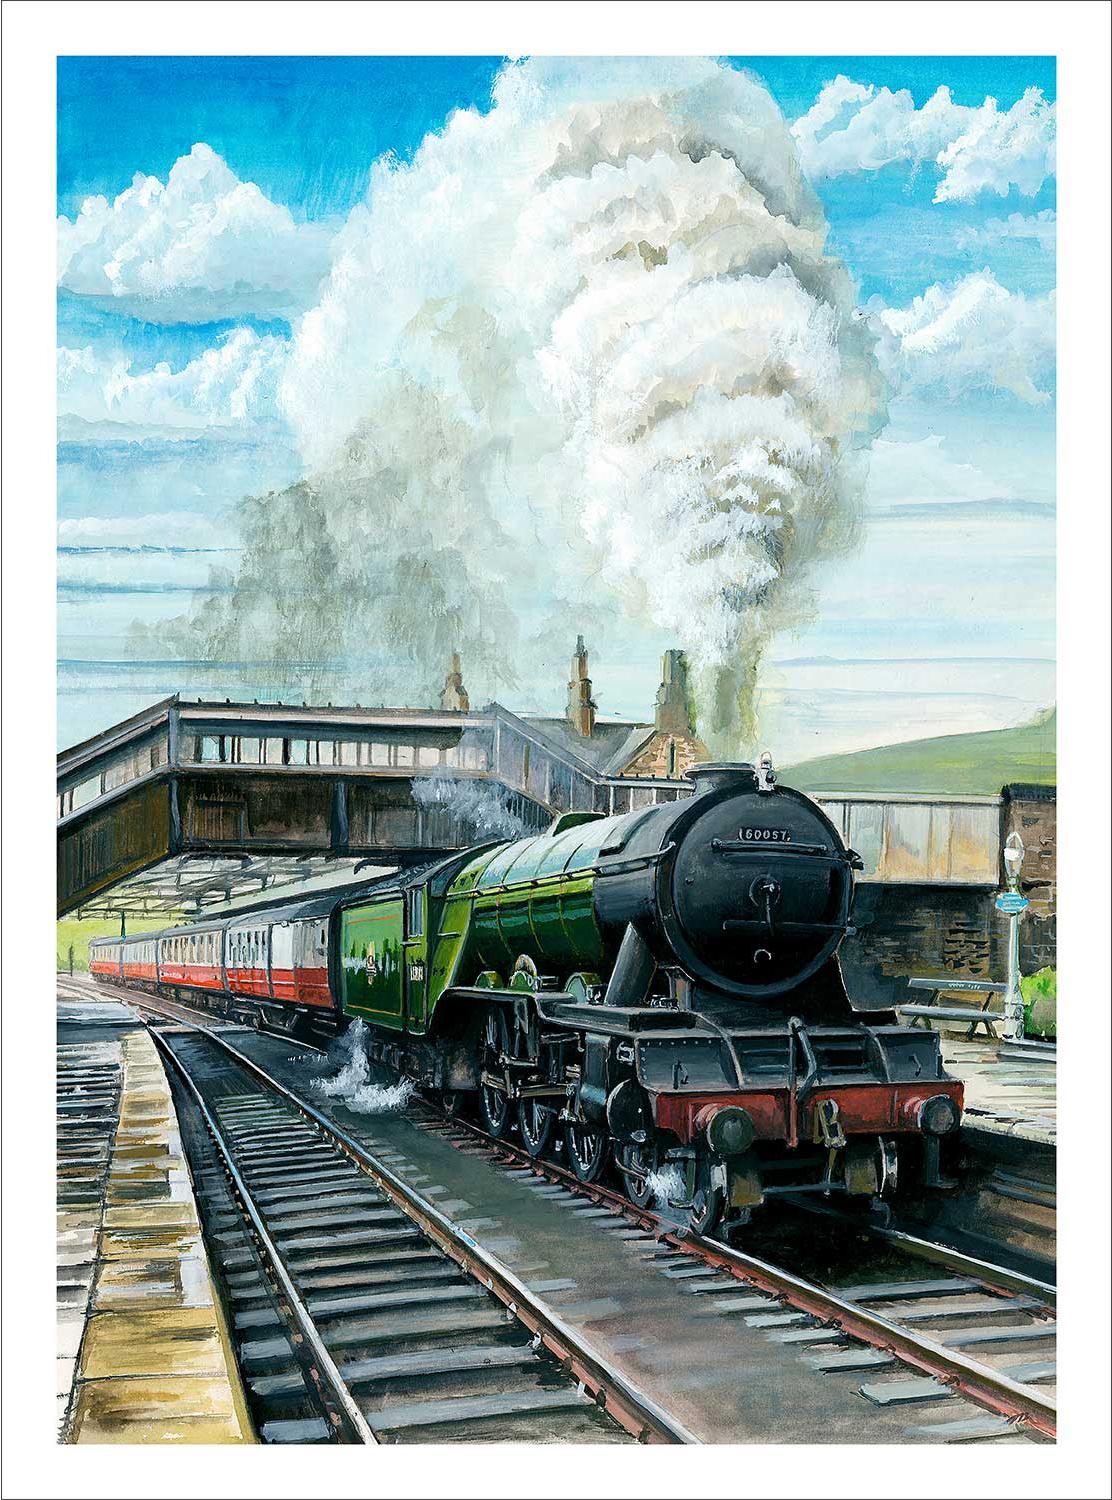 CR419 at the High Bridge Art Print from an original painted by artist Rod Harrison